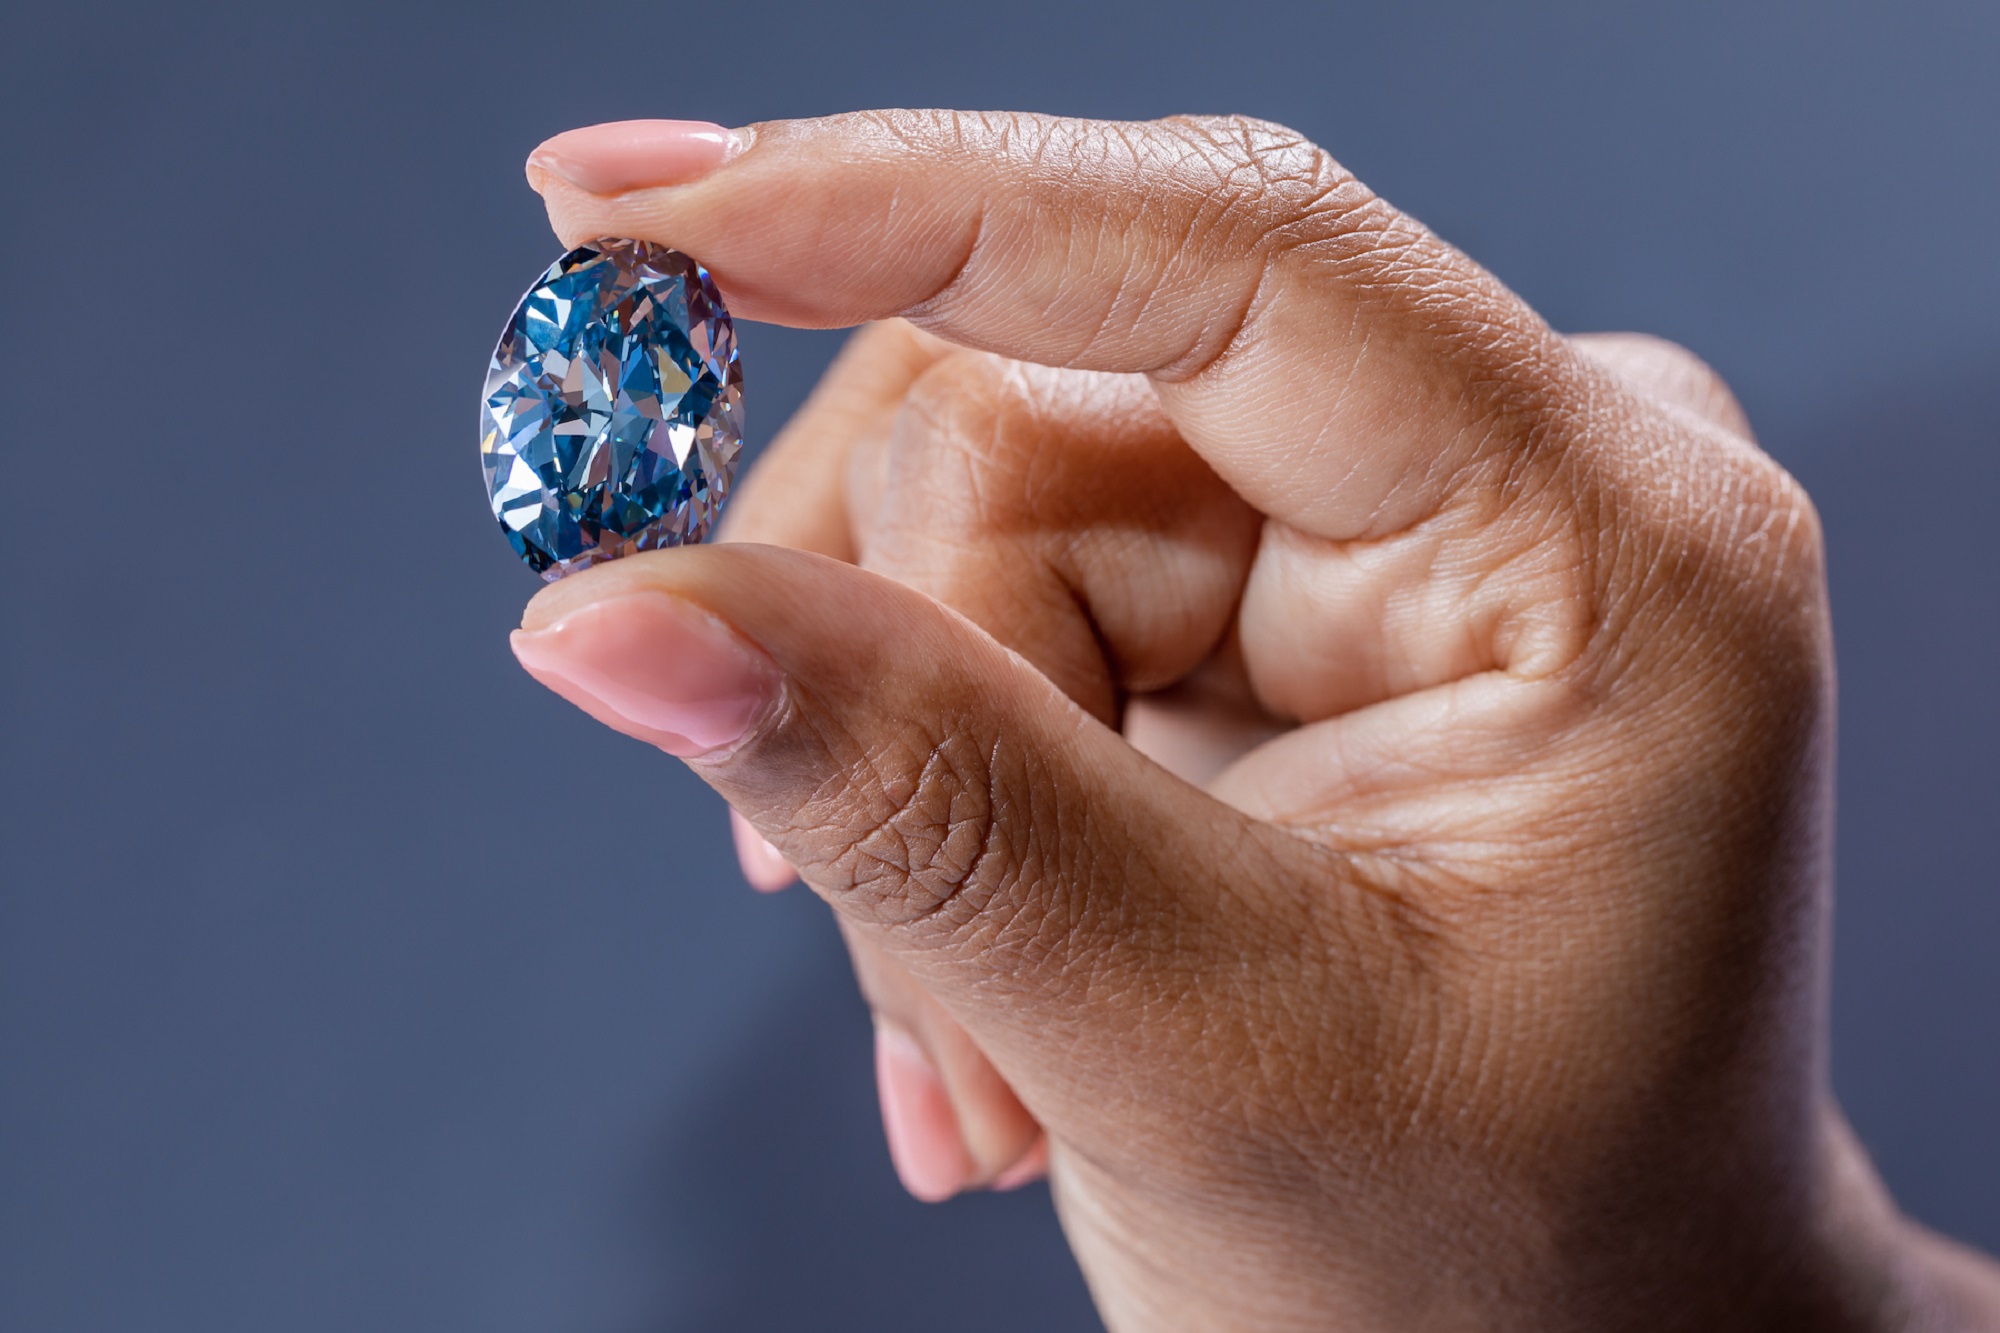 This rare blue diamond is practically a miracle of nature